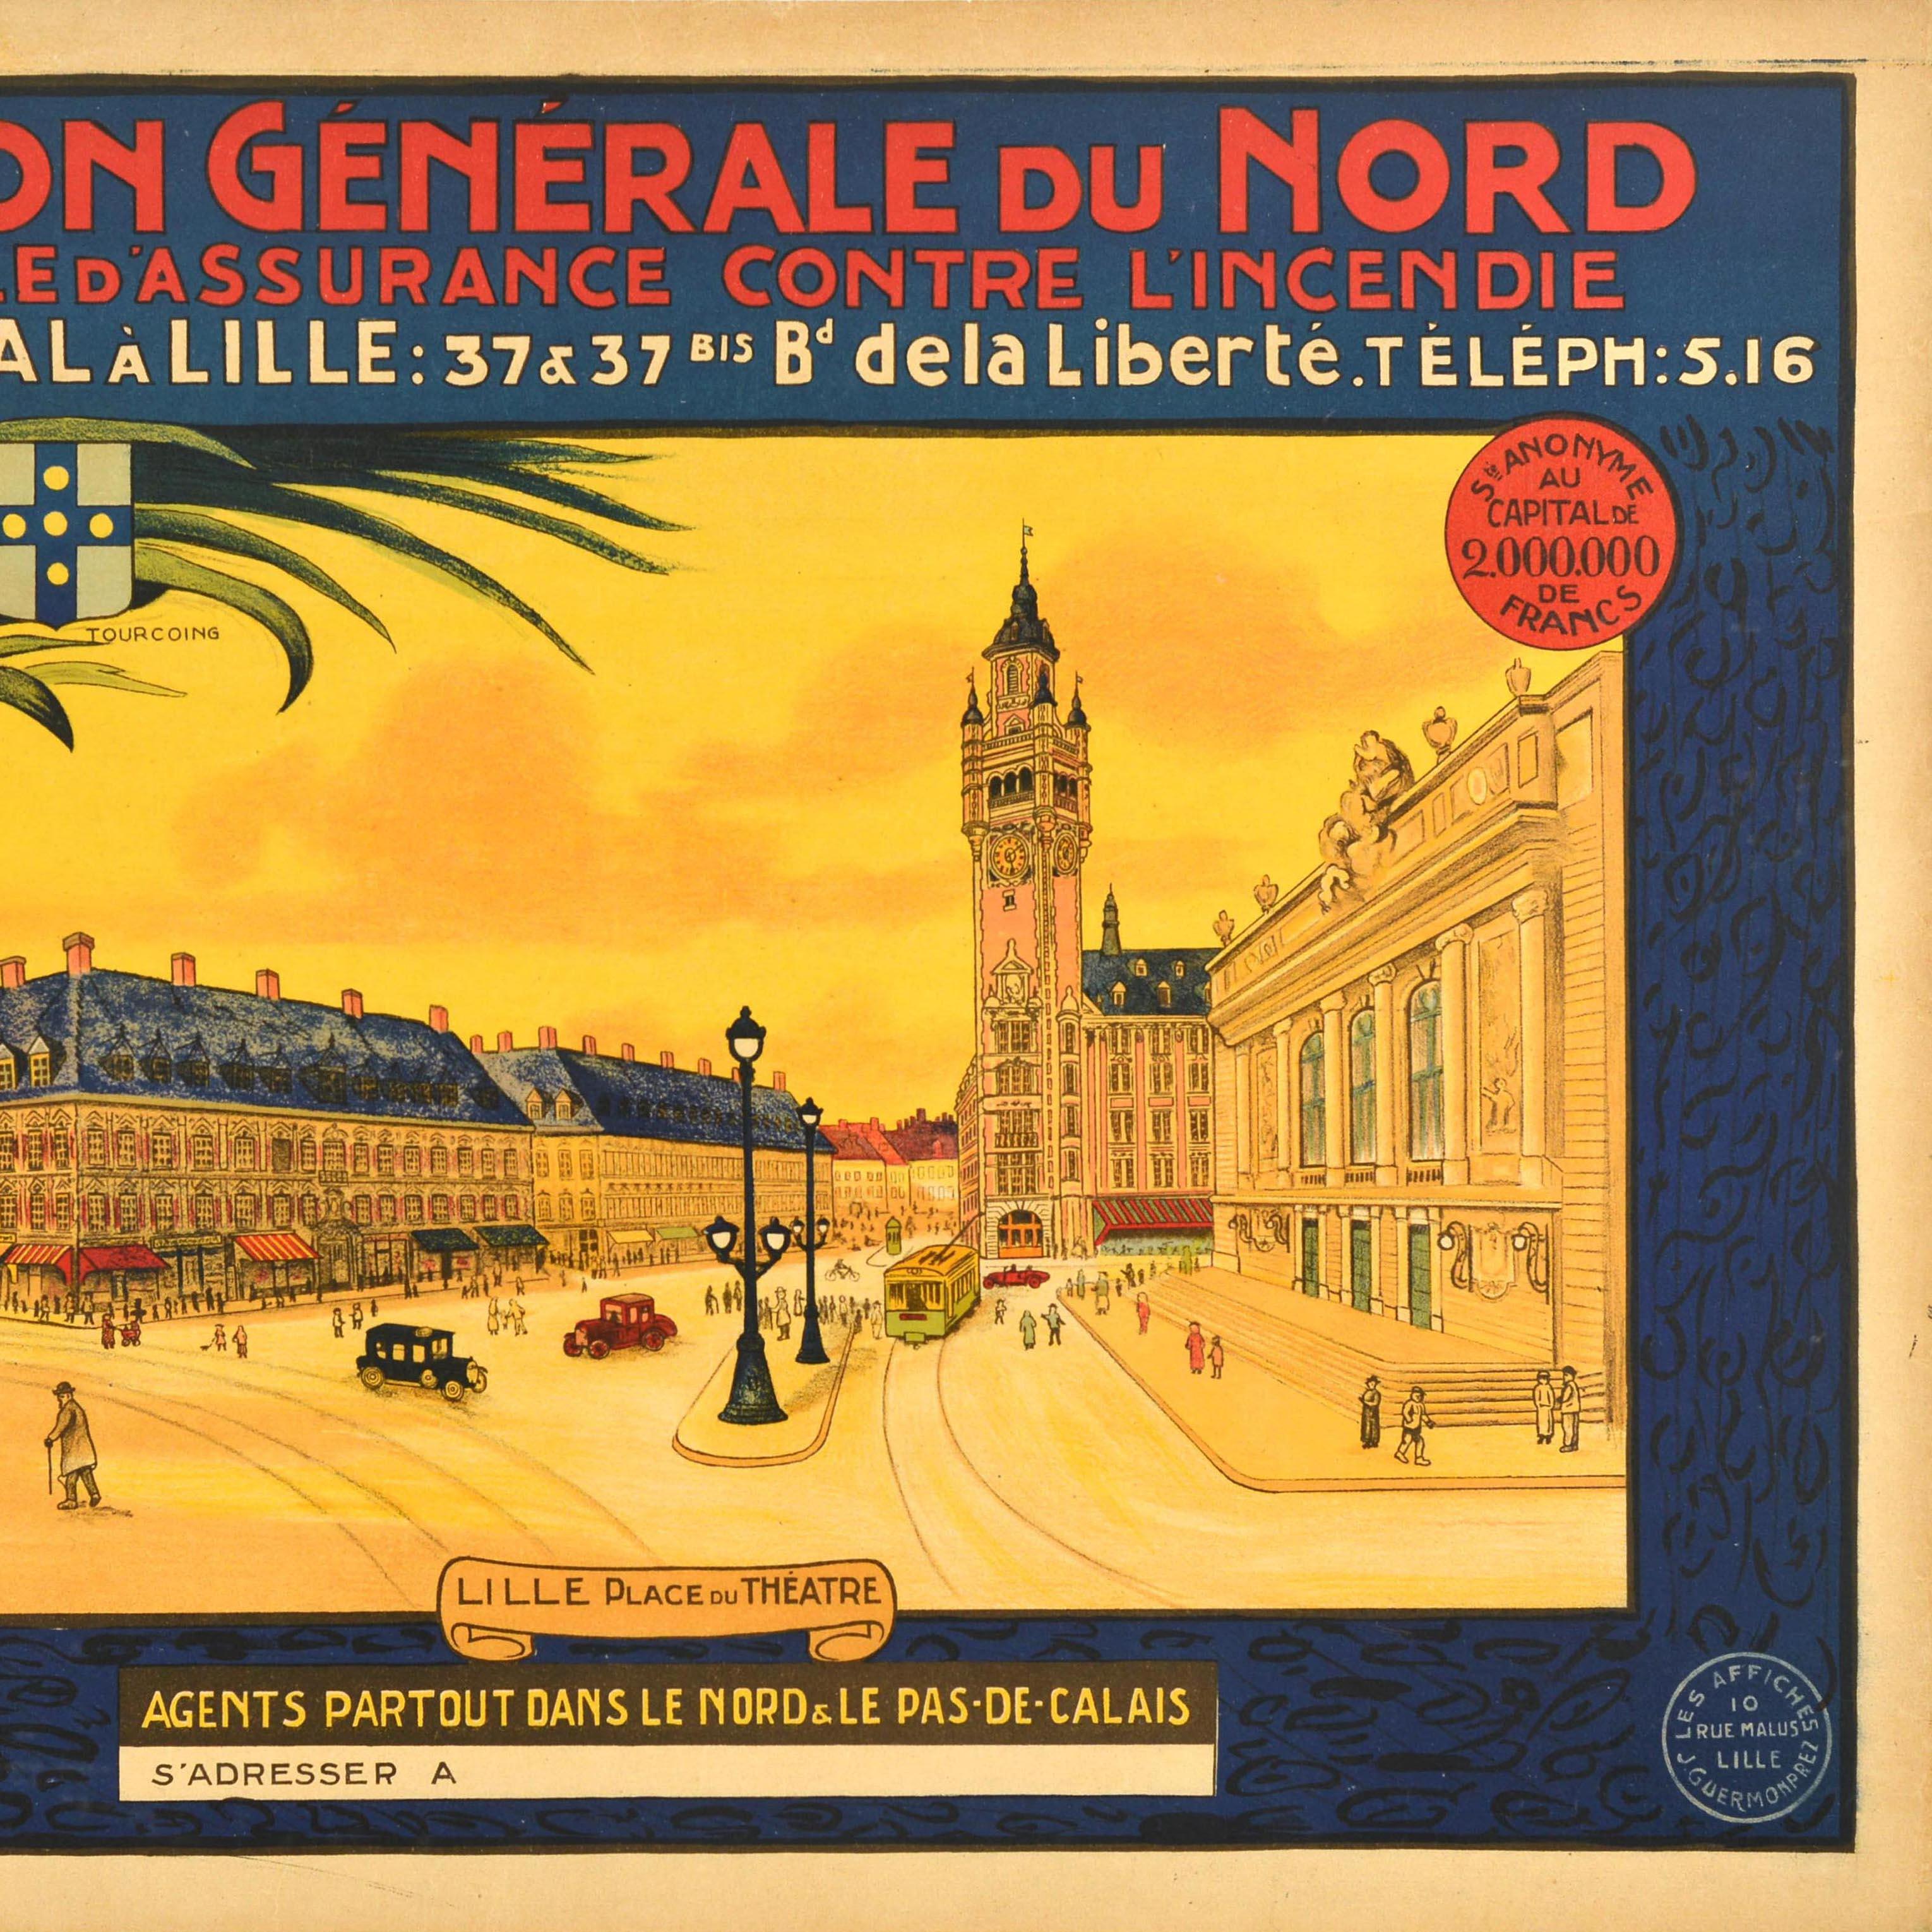 Original vintage advertising poster for The General Union of the North Local Company of Insurance Against Fire Headquarters in Lille founded in 1876 - L'Union Generale Du Nord Cie Locale d'Assurance Contre l'Incendie Siege Social a Lille 37